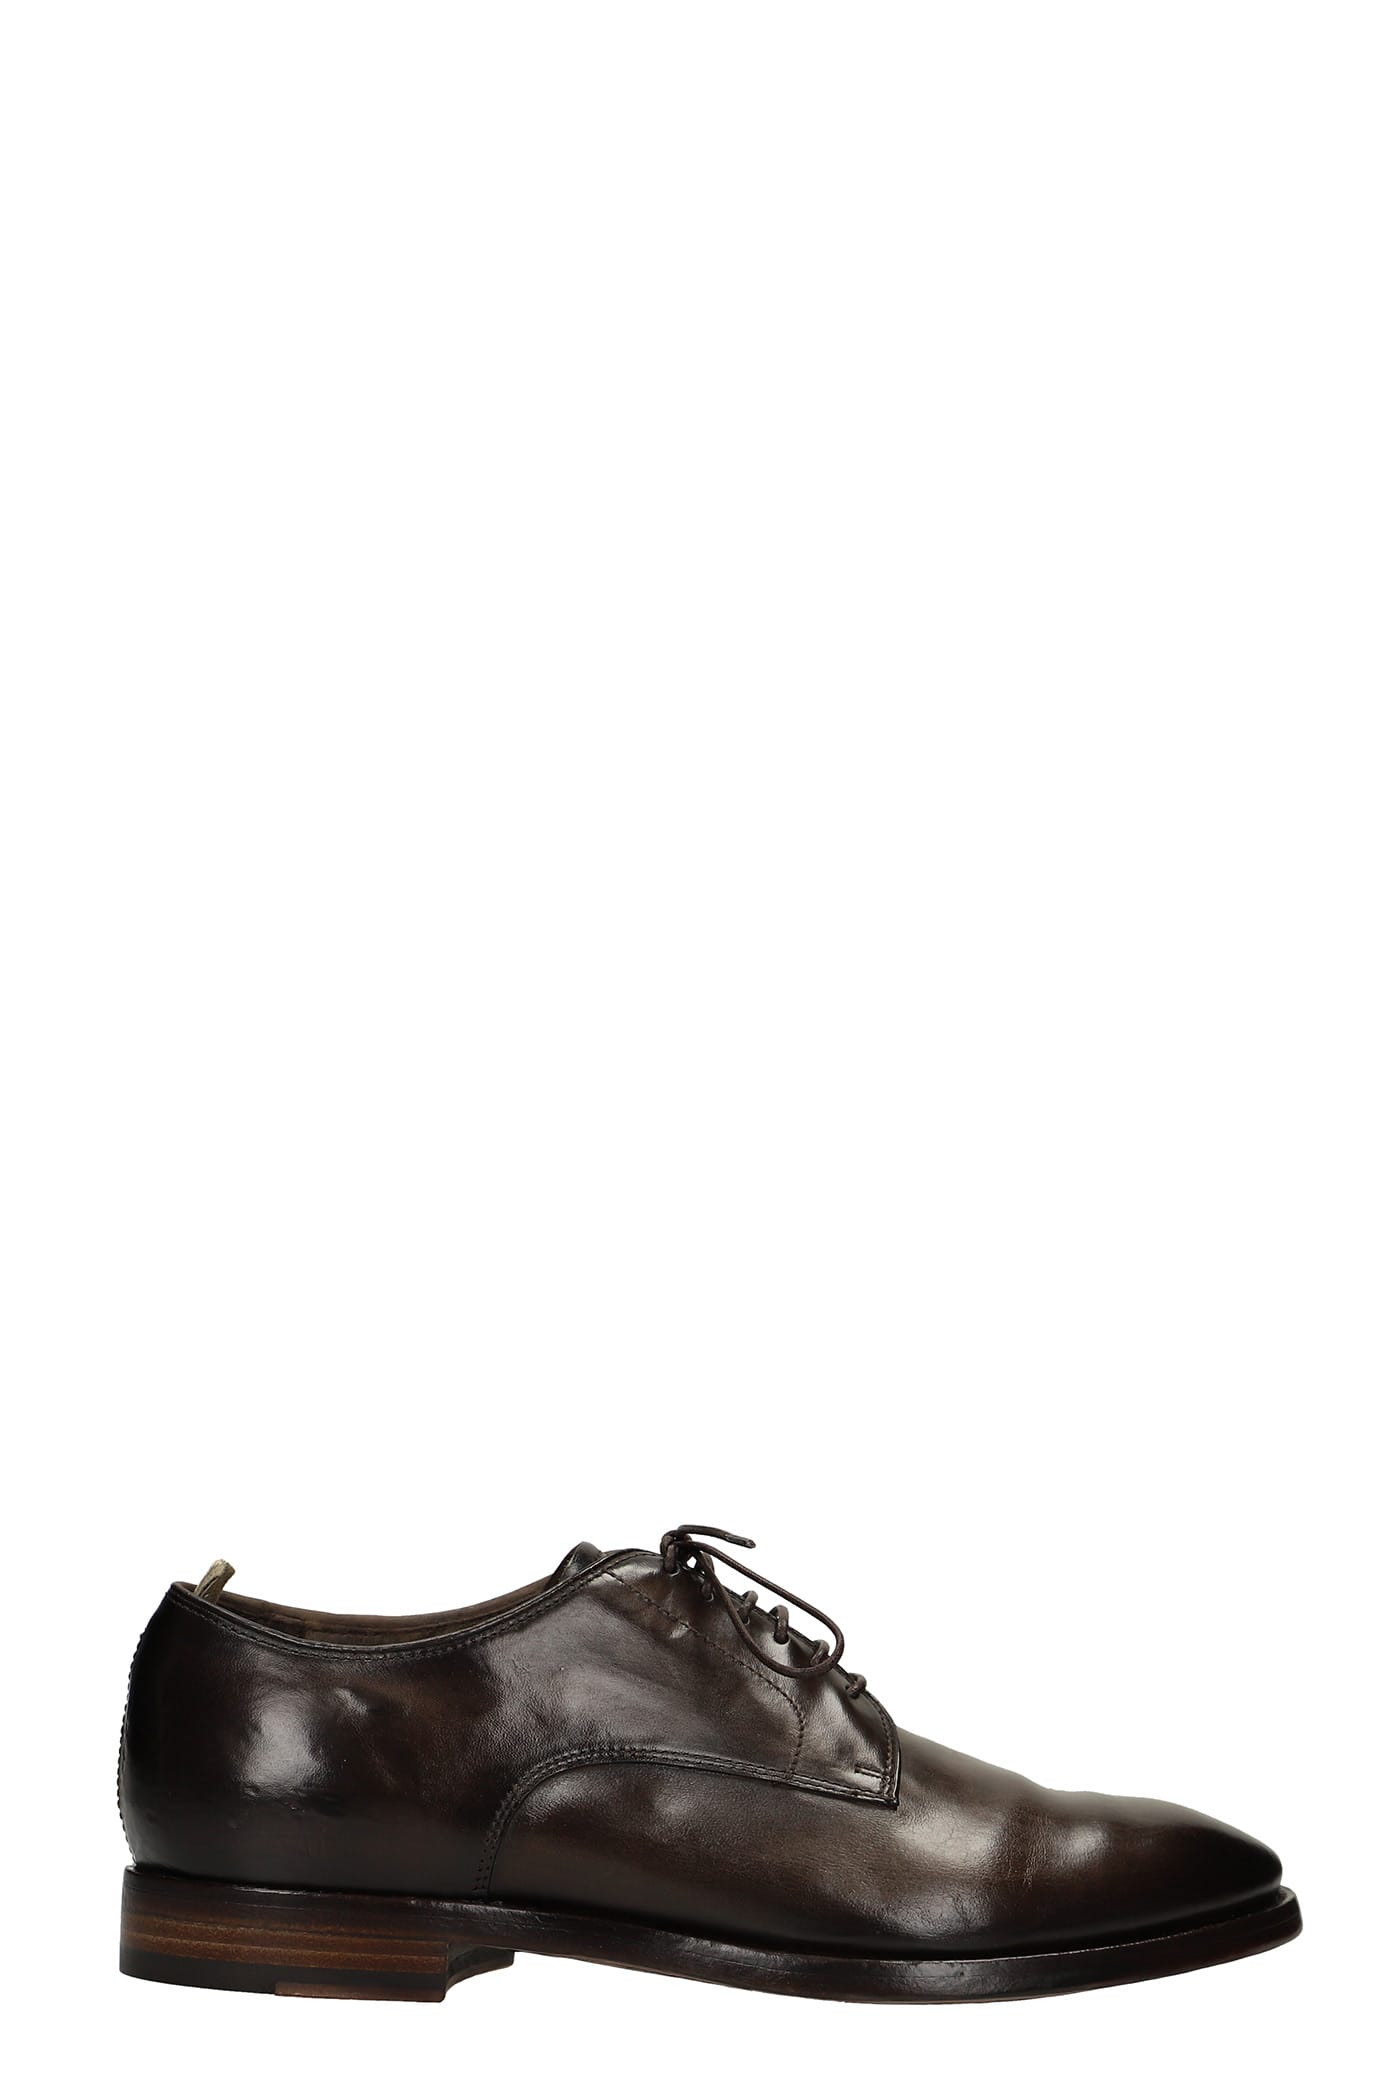 Officine Creative Lace Up Shoes In Brown Leather